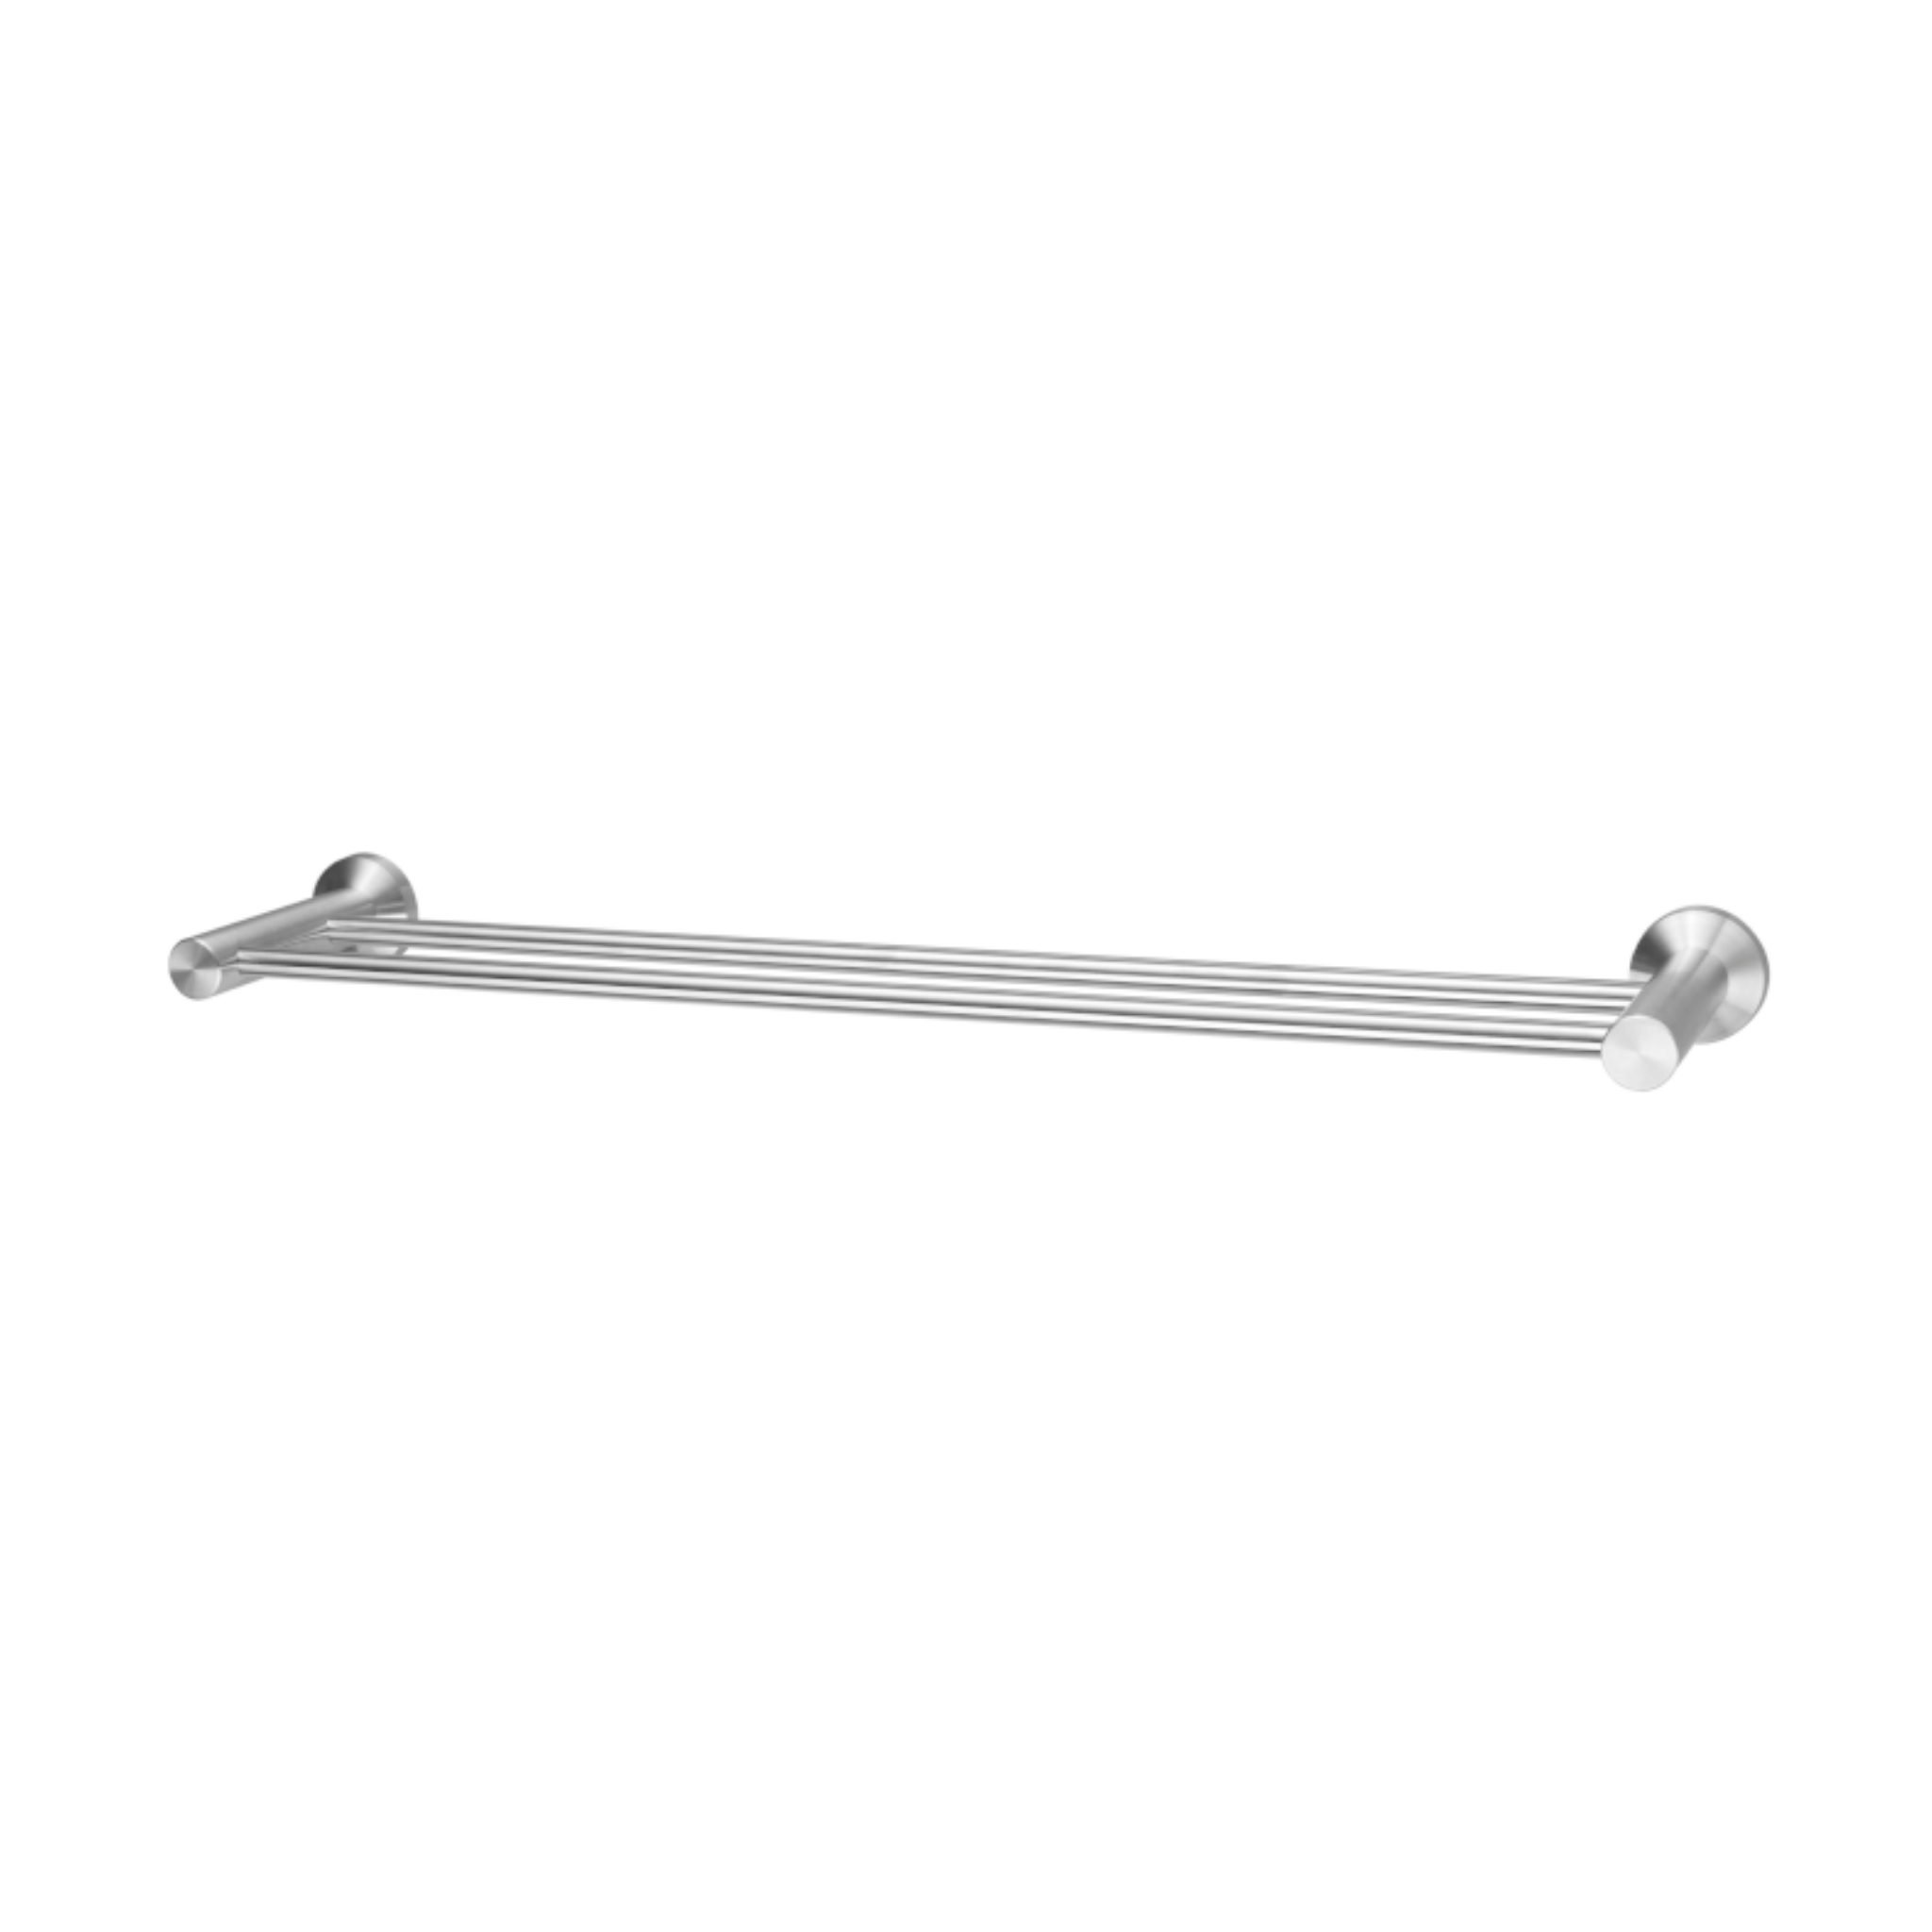 QS1502/SSS, Rail, Double Towel, Satin Stainless Steel, QS